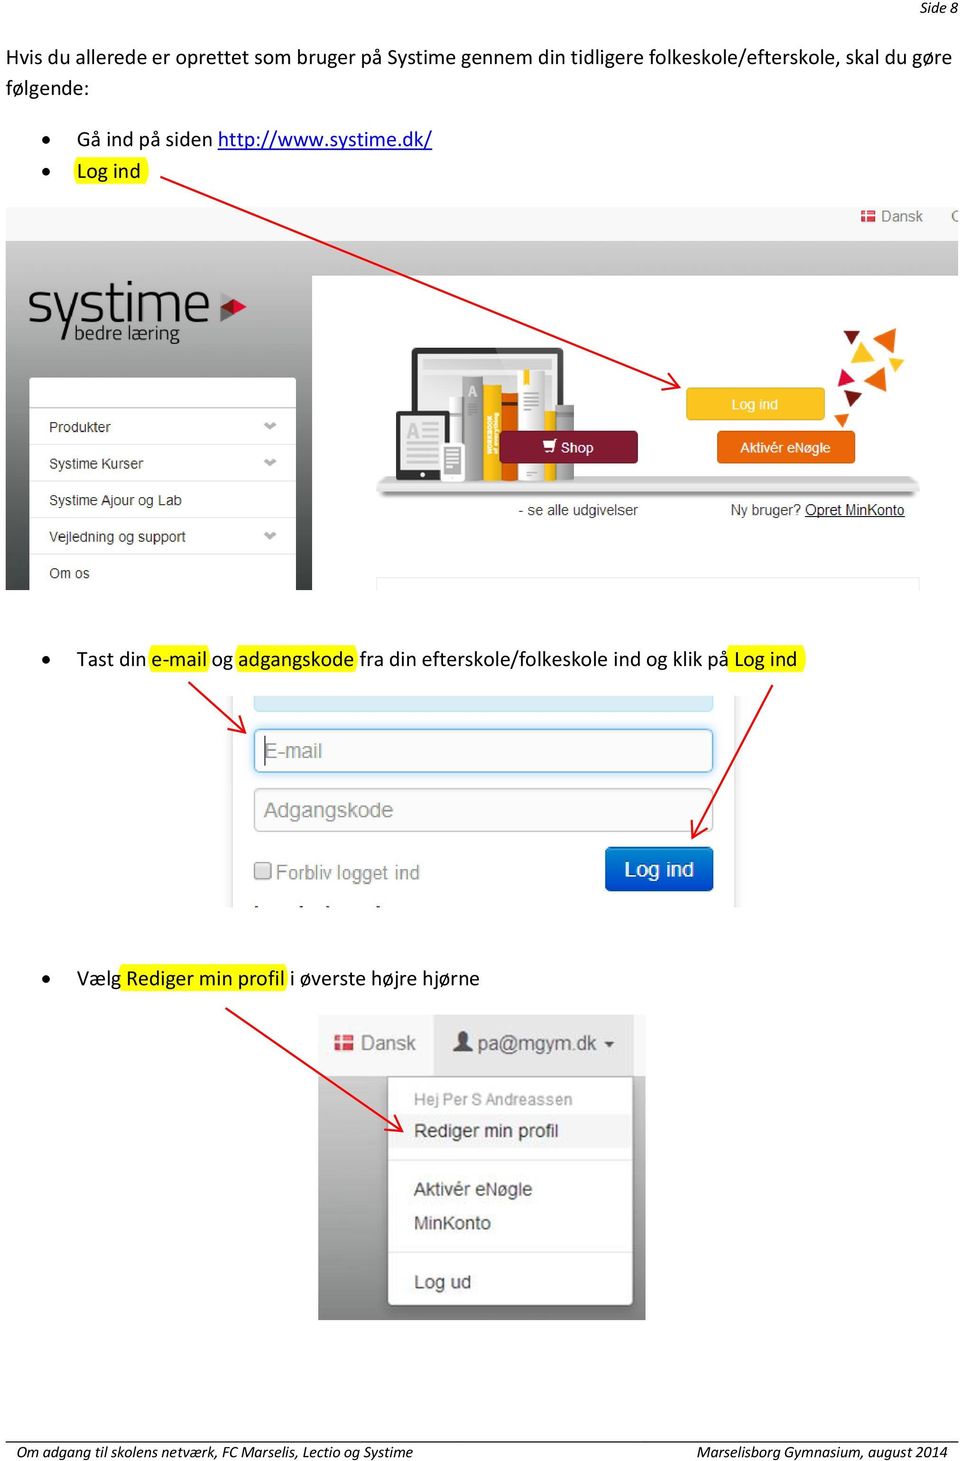 http://www.systime.